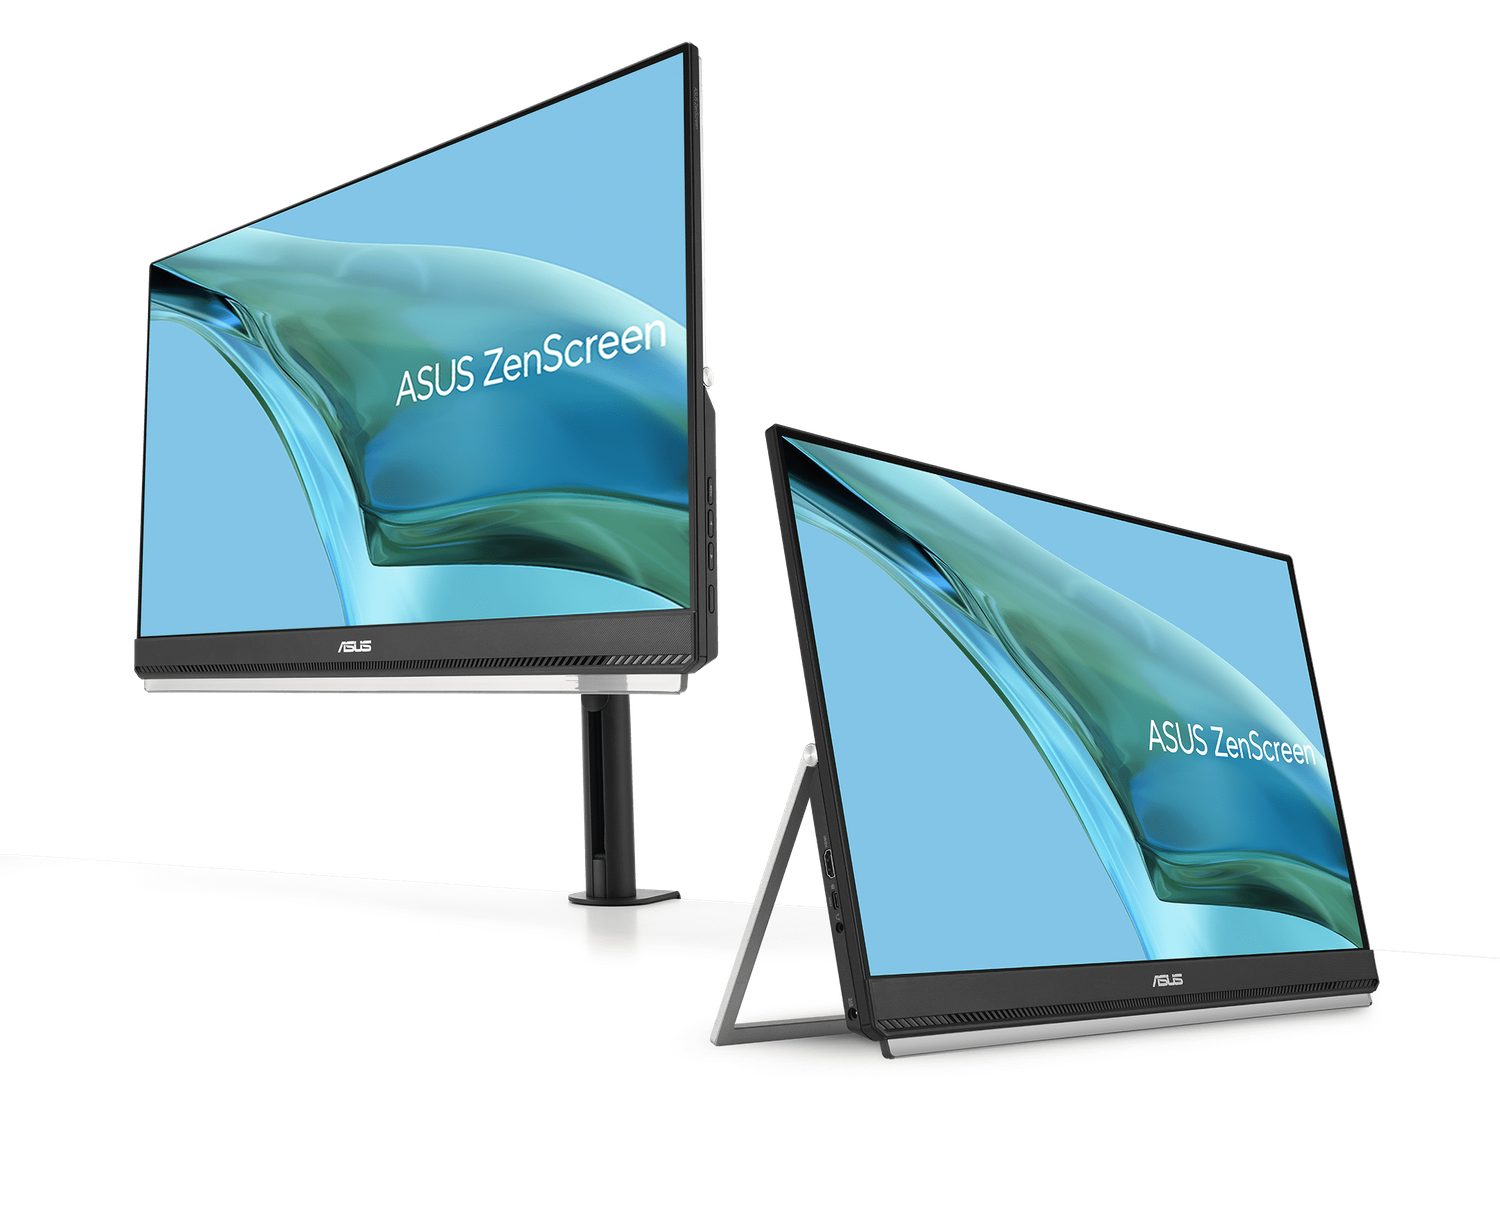 Asus MB249C LCD-Monitor (60.5 cm/23.8 ", 1920 x 1080 px, 5 ms Reaktionszeit, 75 Hz, LED)